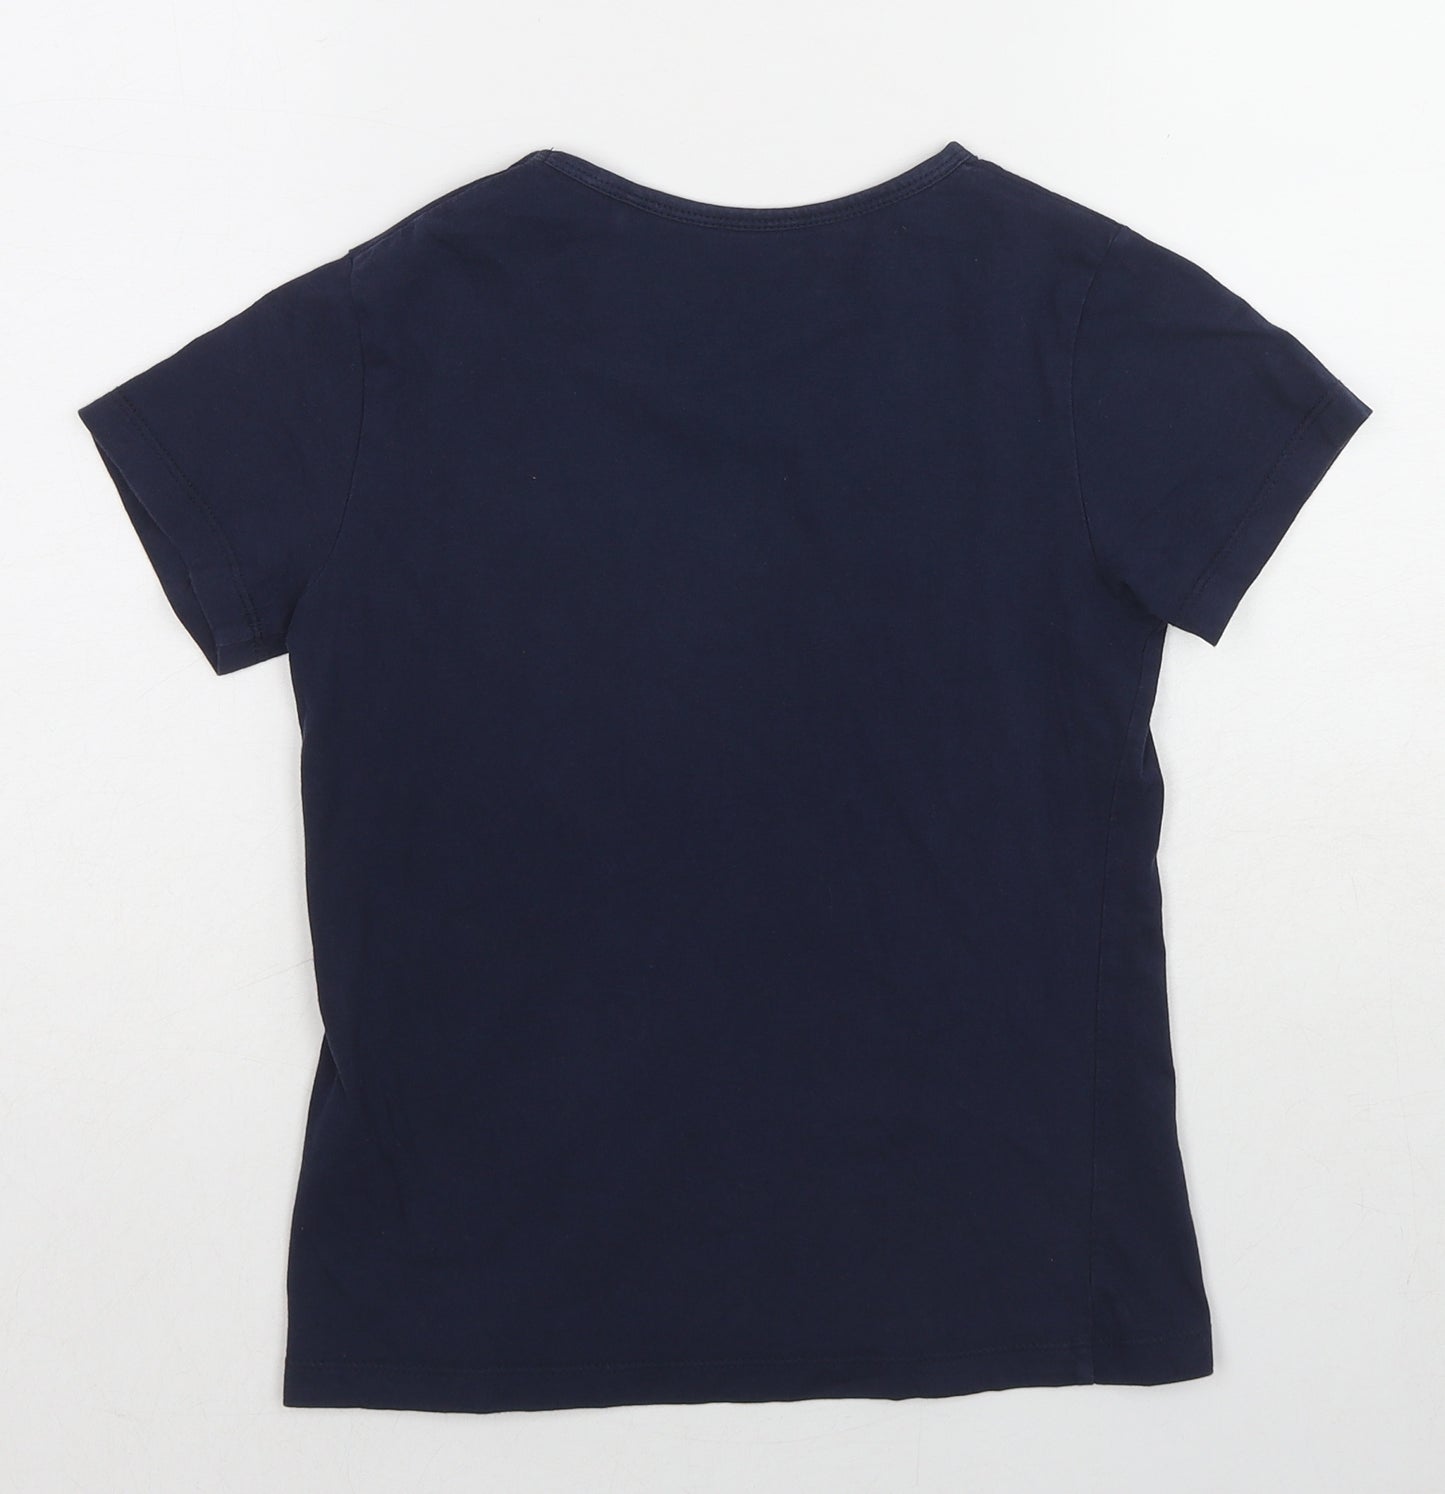 Pepperts Girls Blue Cotton Basic T-Shirt Size 8-9 Years Round Neck Pullover